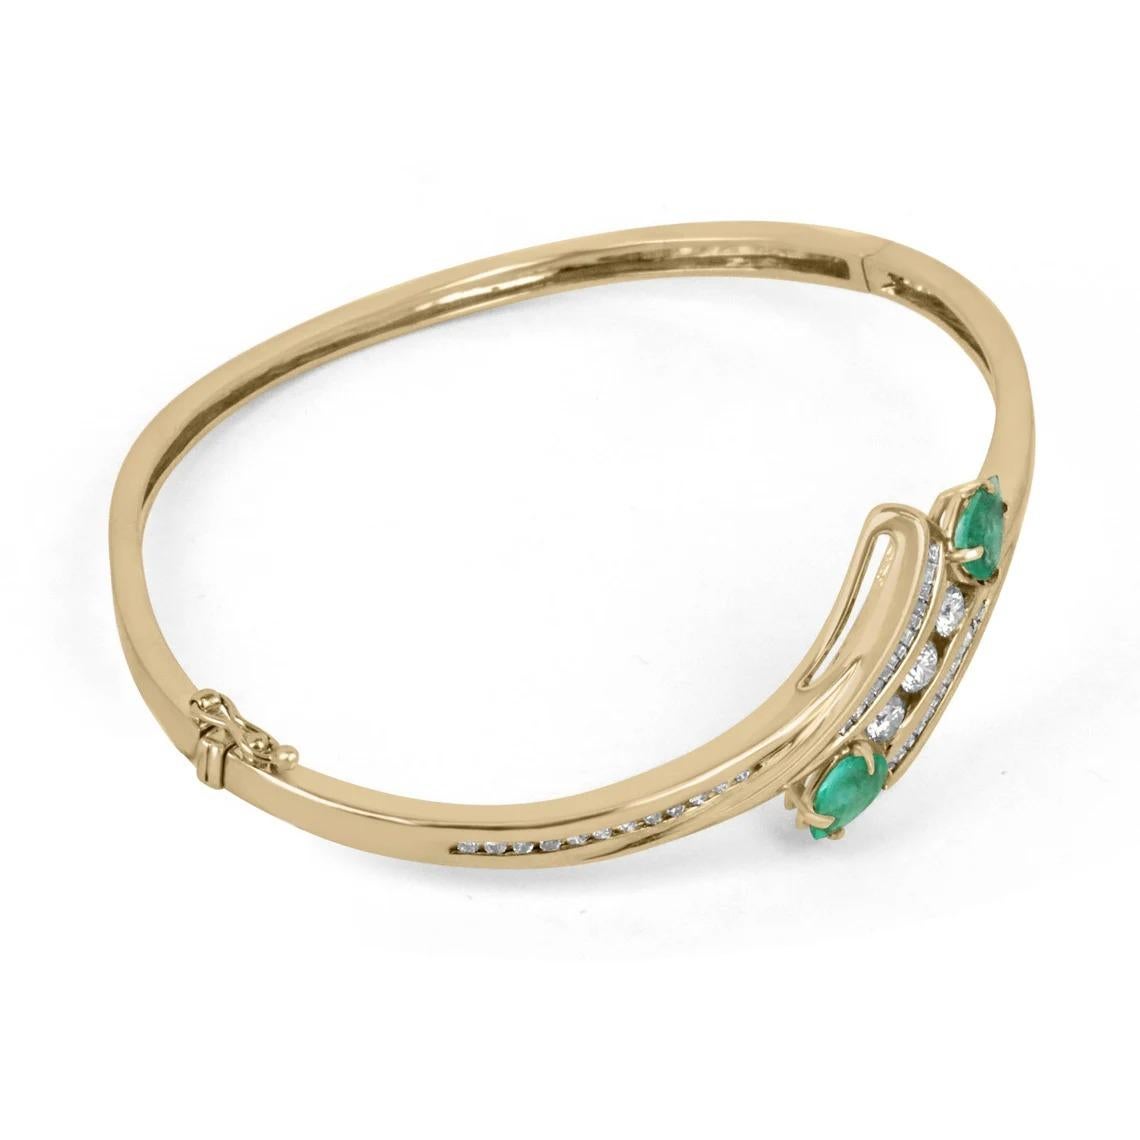 A remarkable emerald and diamond bangle bracelet. Two beautiful pear-cut Colombian emeralds accent the sides of the three brilliant round-cut diamonds that are tension set within the center. A split design with petite brilliant round cut diamonds